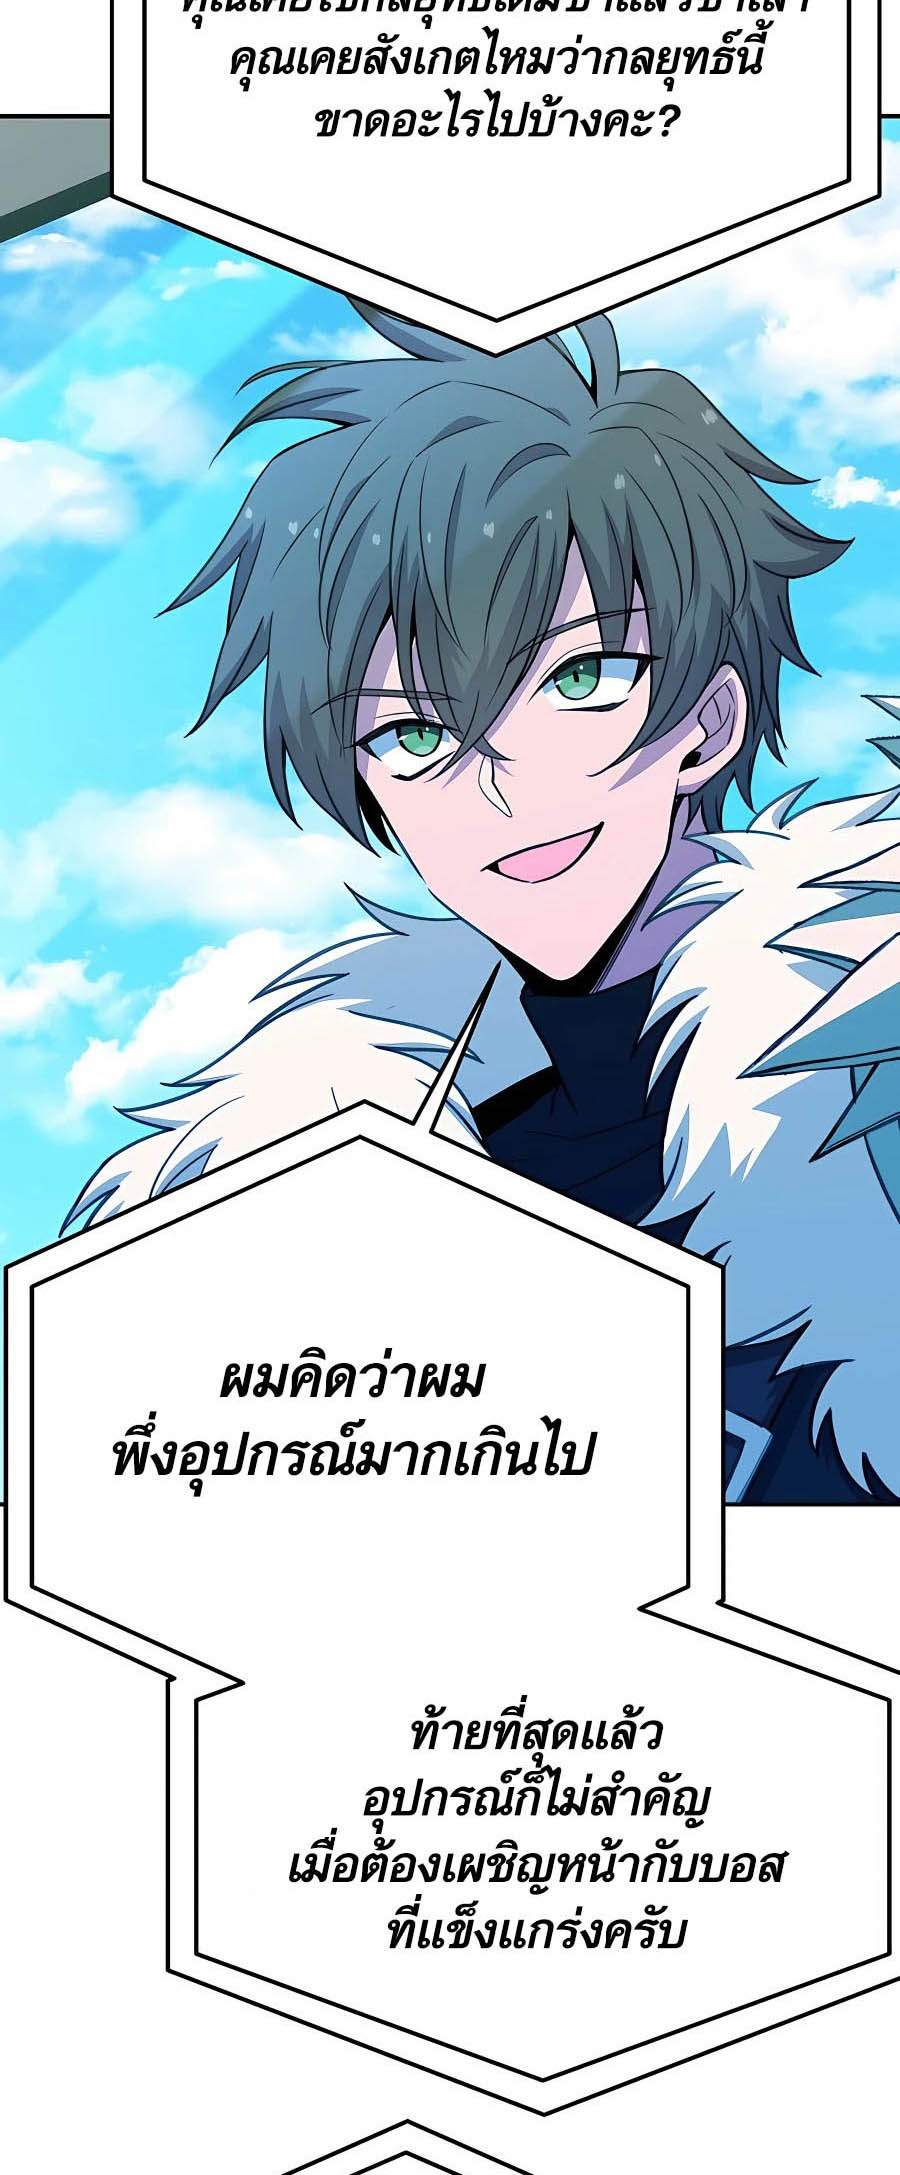 à¸­à¹ˆà¸²à¸™à¸¡à¸±à¸™à¸®à¸§à¸² à¹€à¸£à¸·à¹ˆà¸­à¸‡ The Part Time Land of the Gods 56 58